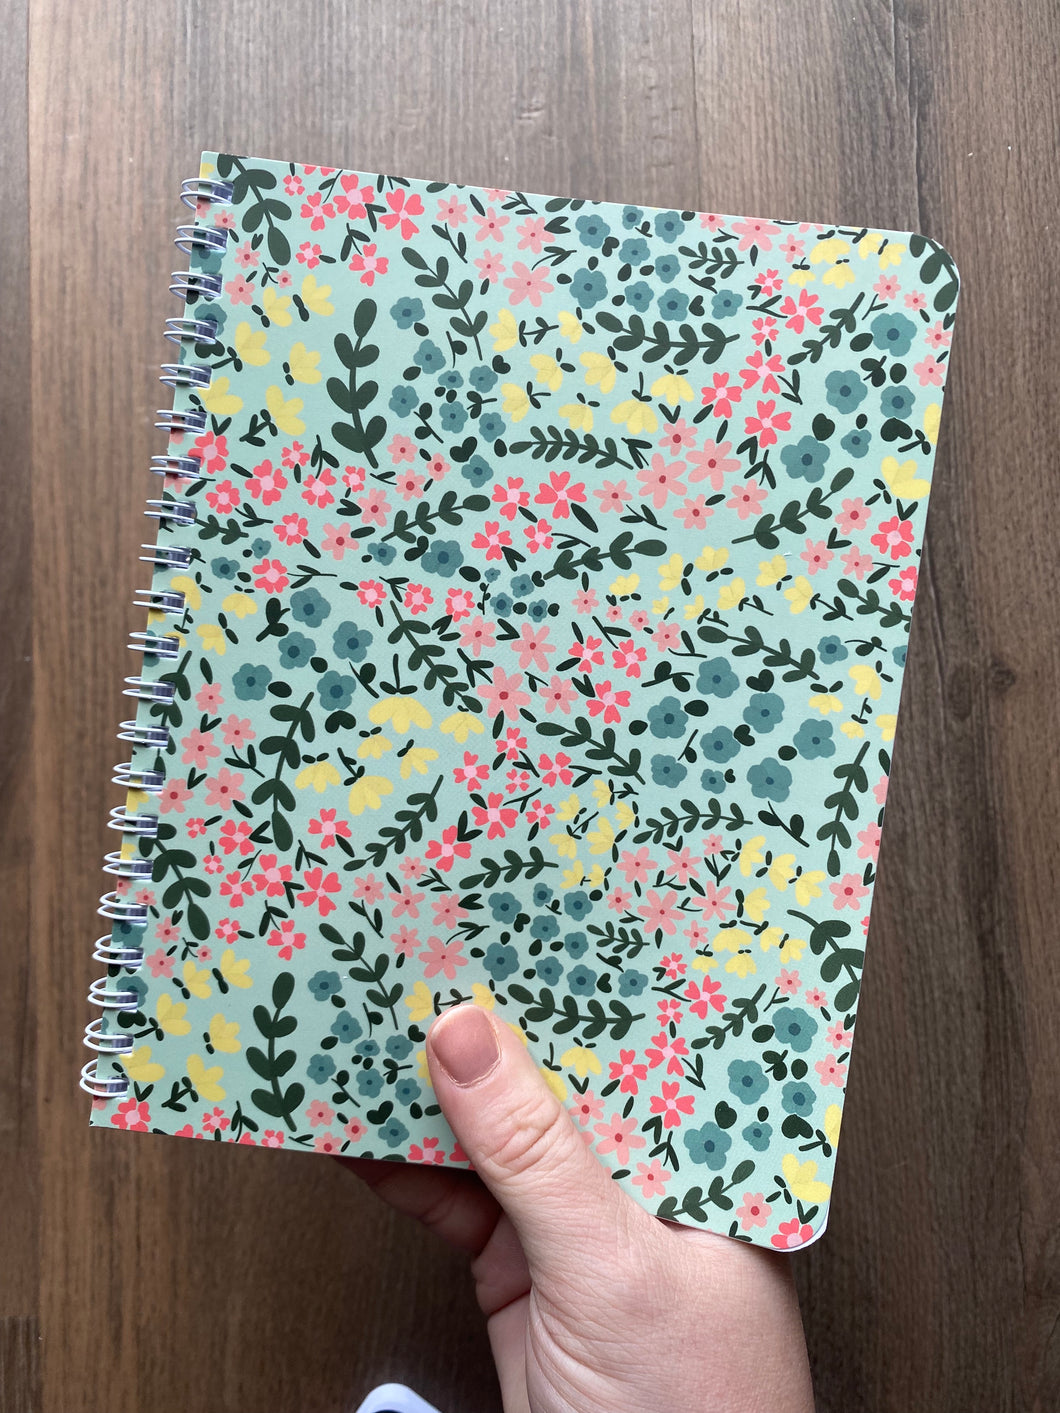 Floral Fields Spiral Notebook Small